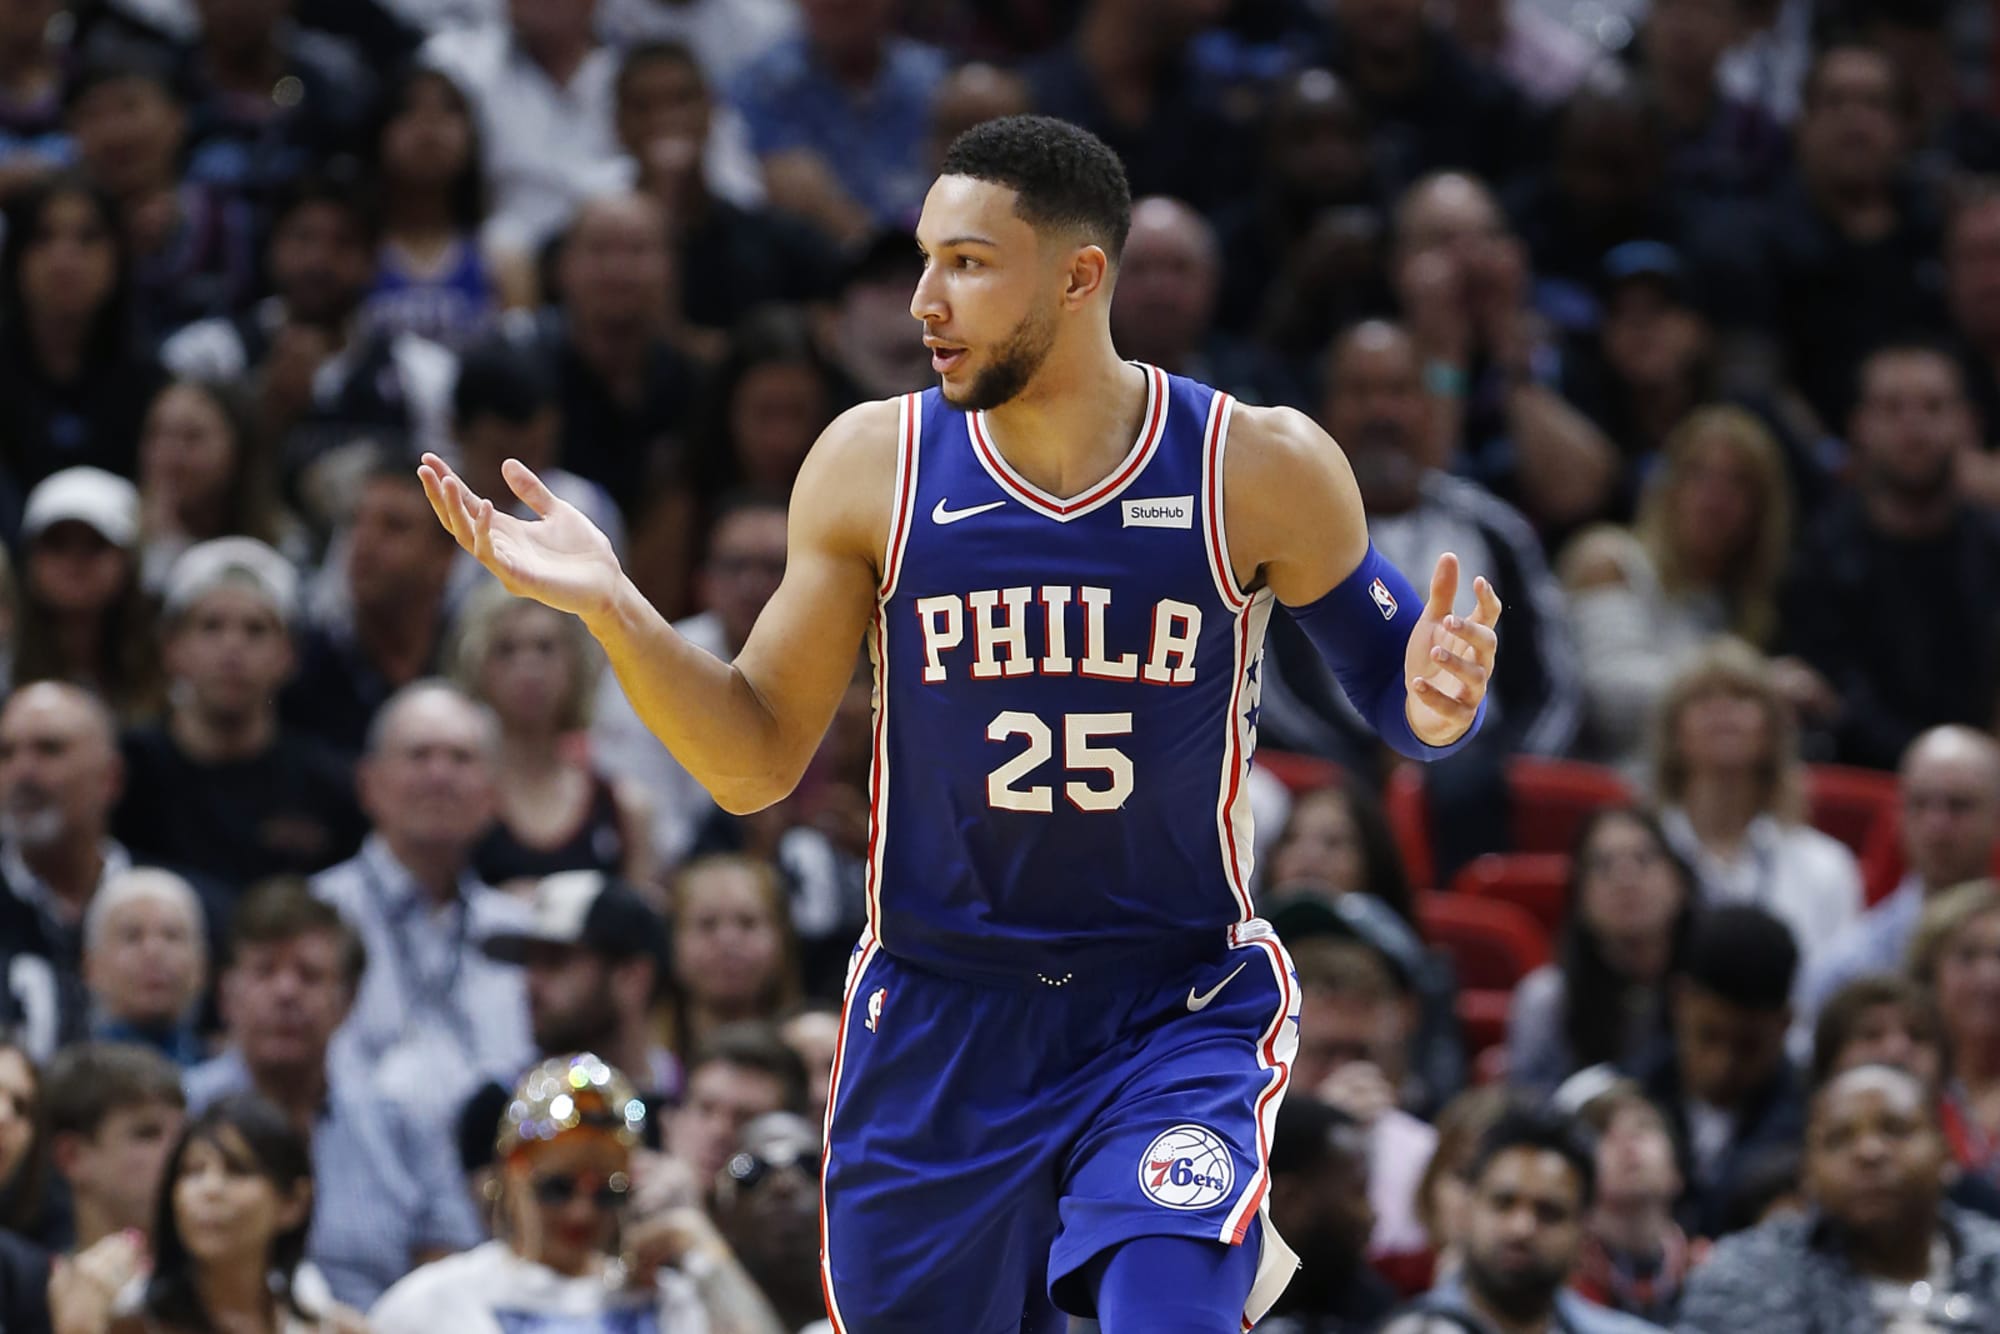 Philadelphia 76ers 2019 playoff schedule against Brooklyn Nets released